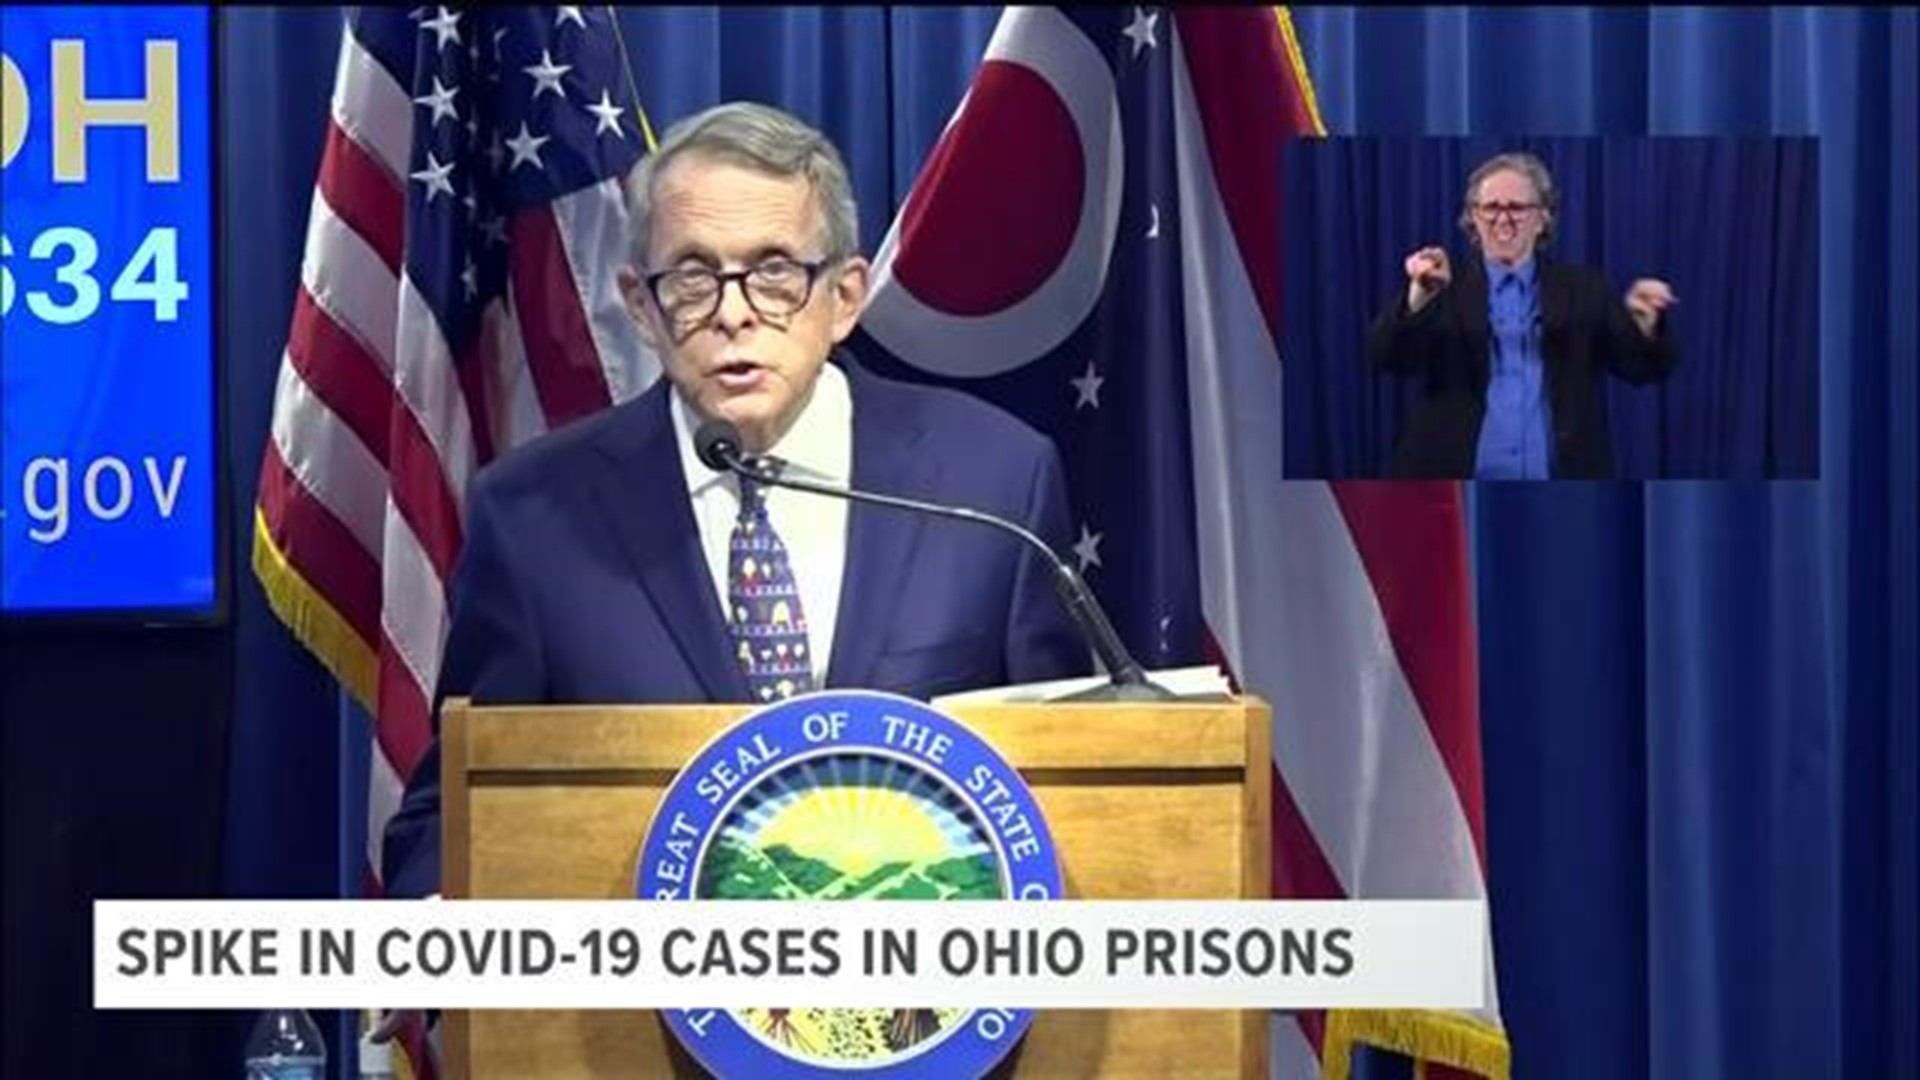 Nearly 2,000 inmates at Marion Correctional Institution test positive for COVID-19